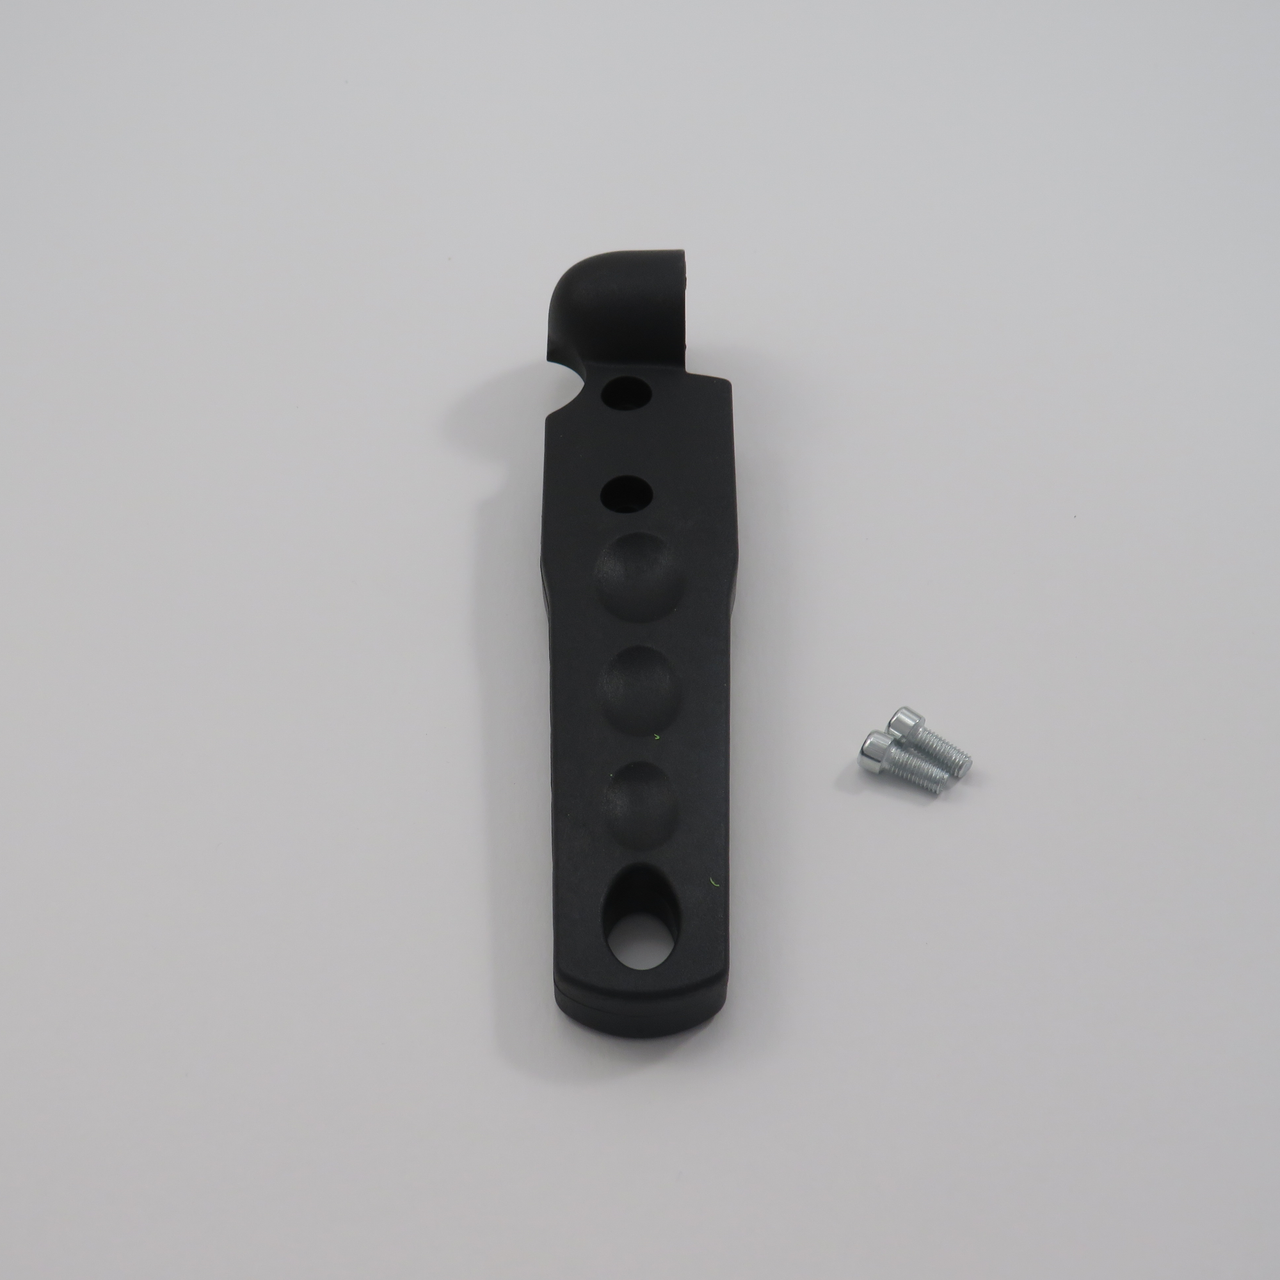 Handle for Blade and Screws